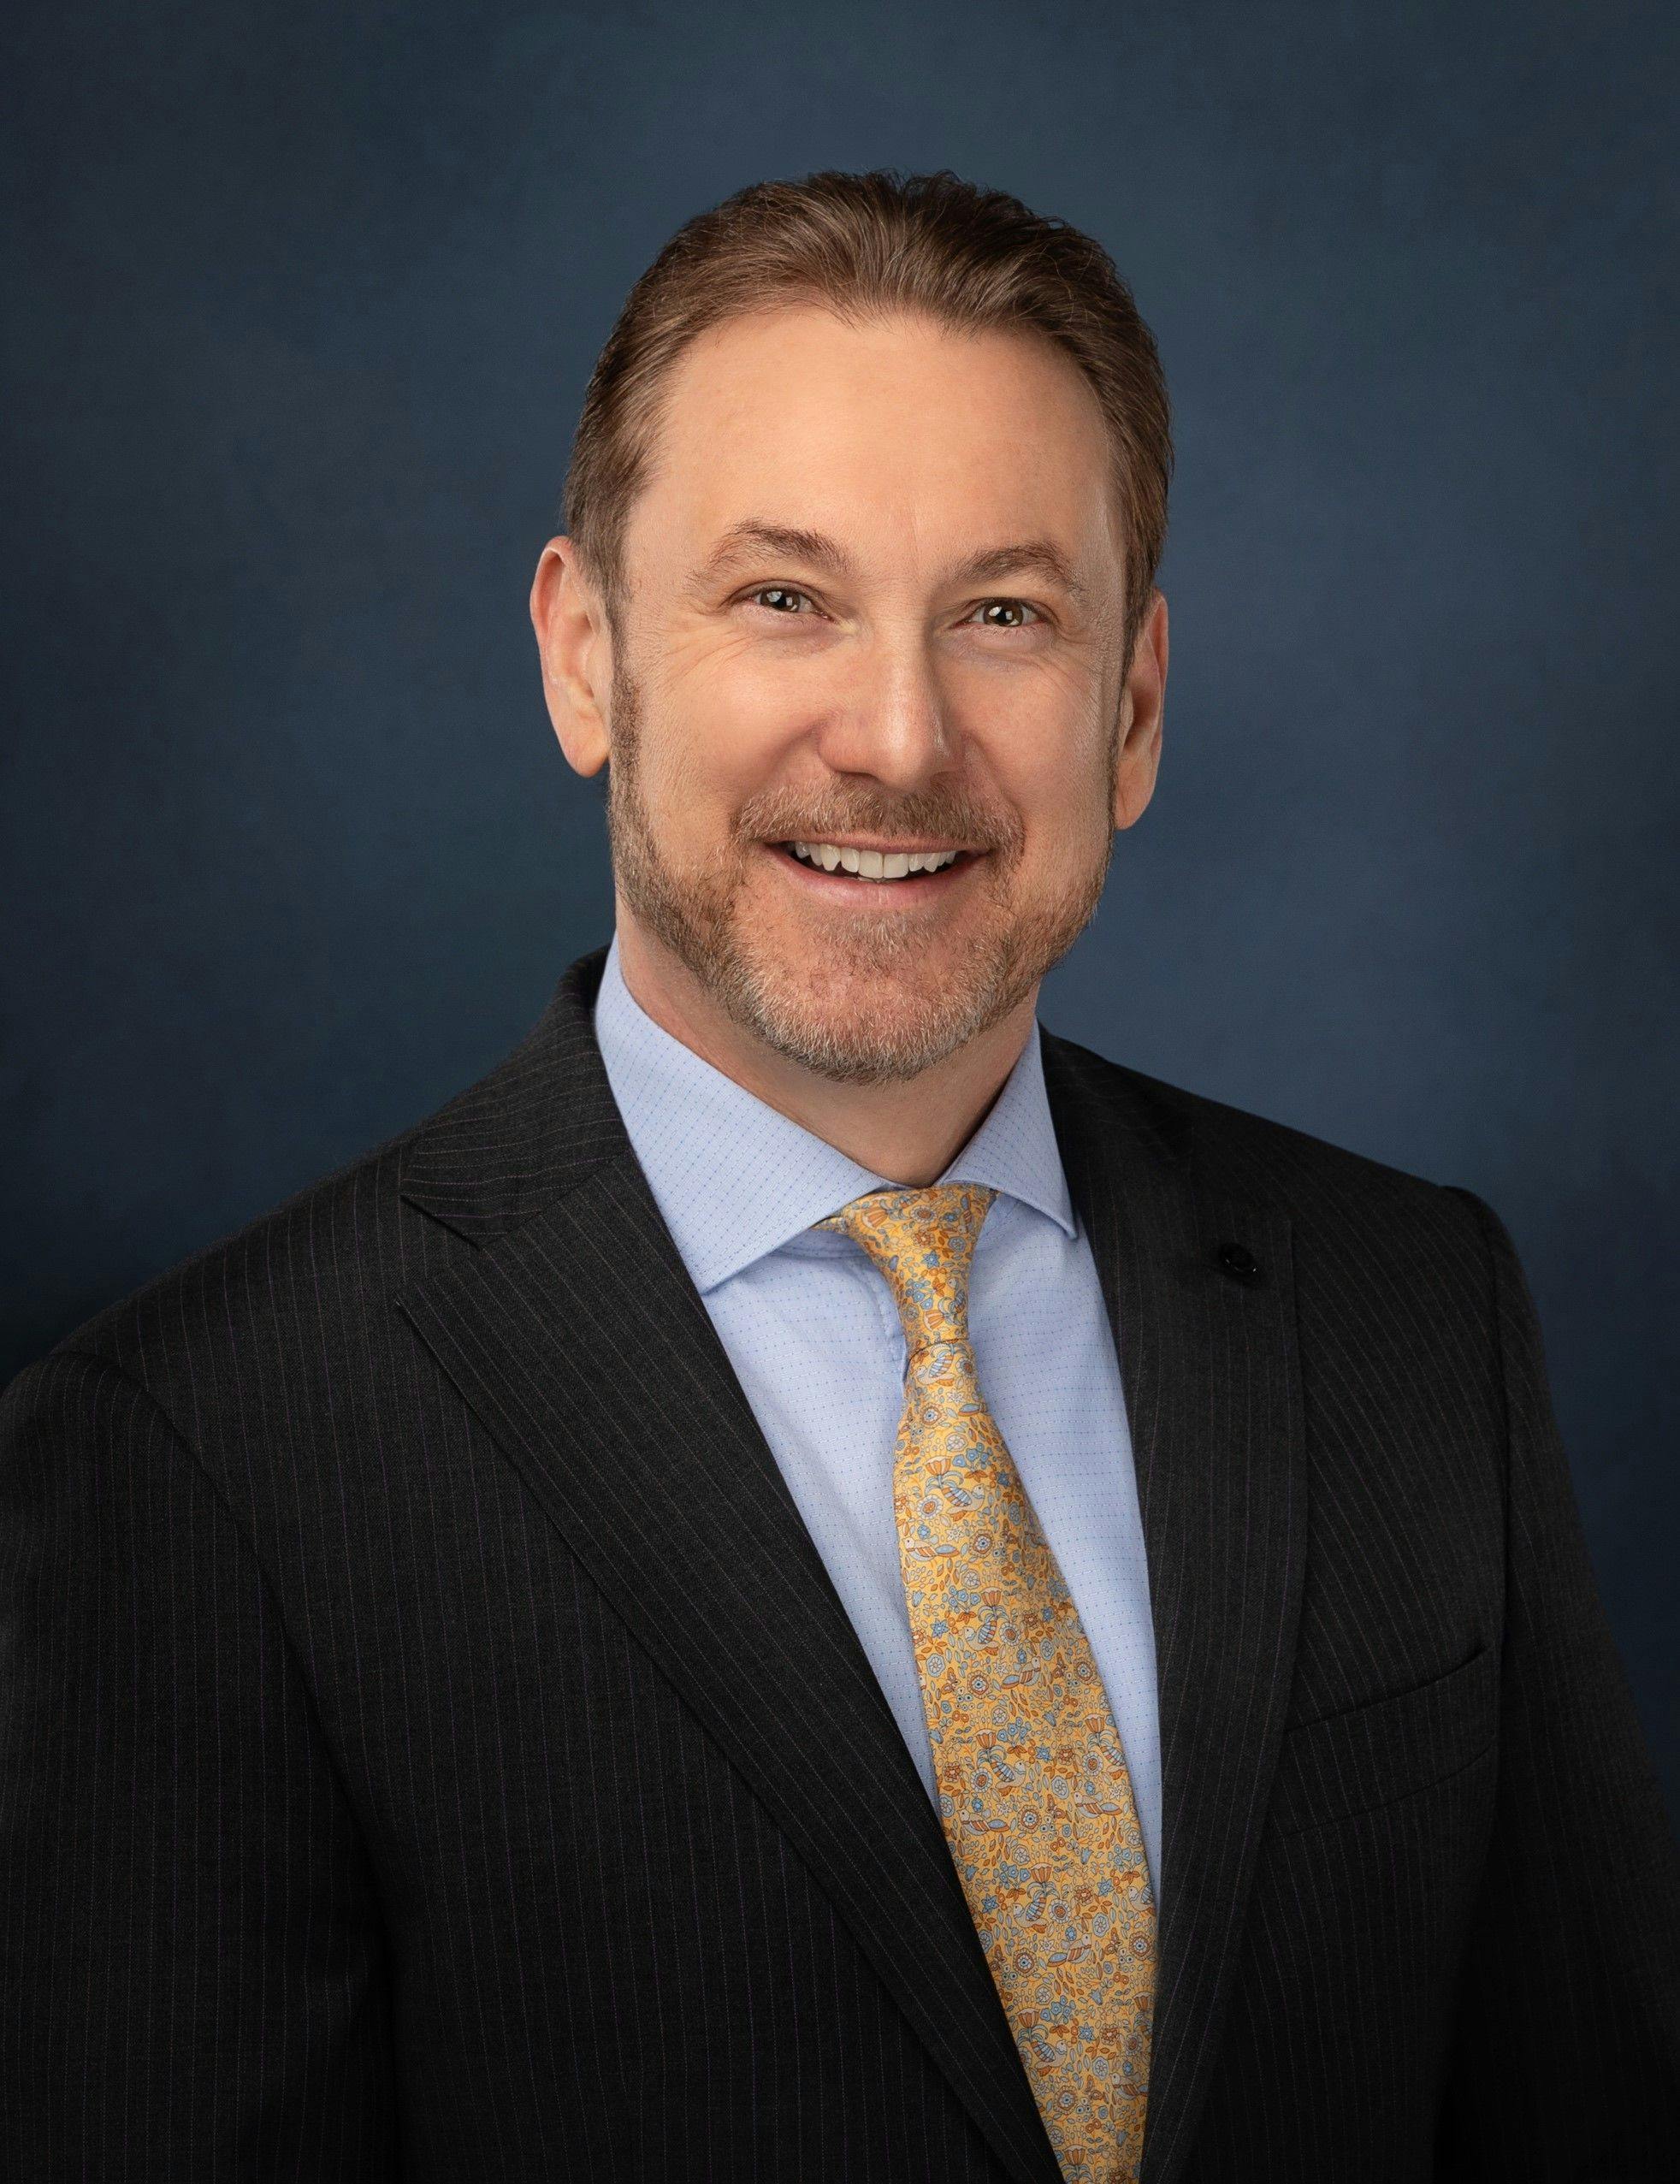 Matt Heywood, CEO of Aspirus Health, has led a period of substantial growth for the Wisconsin-based system. (Photo: Aspirus Health)